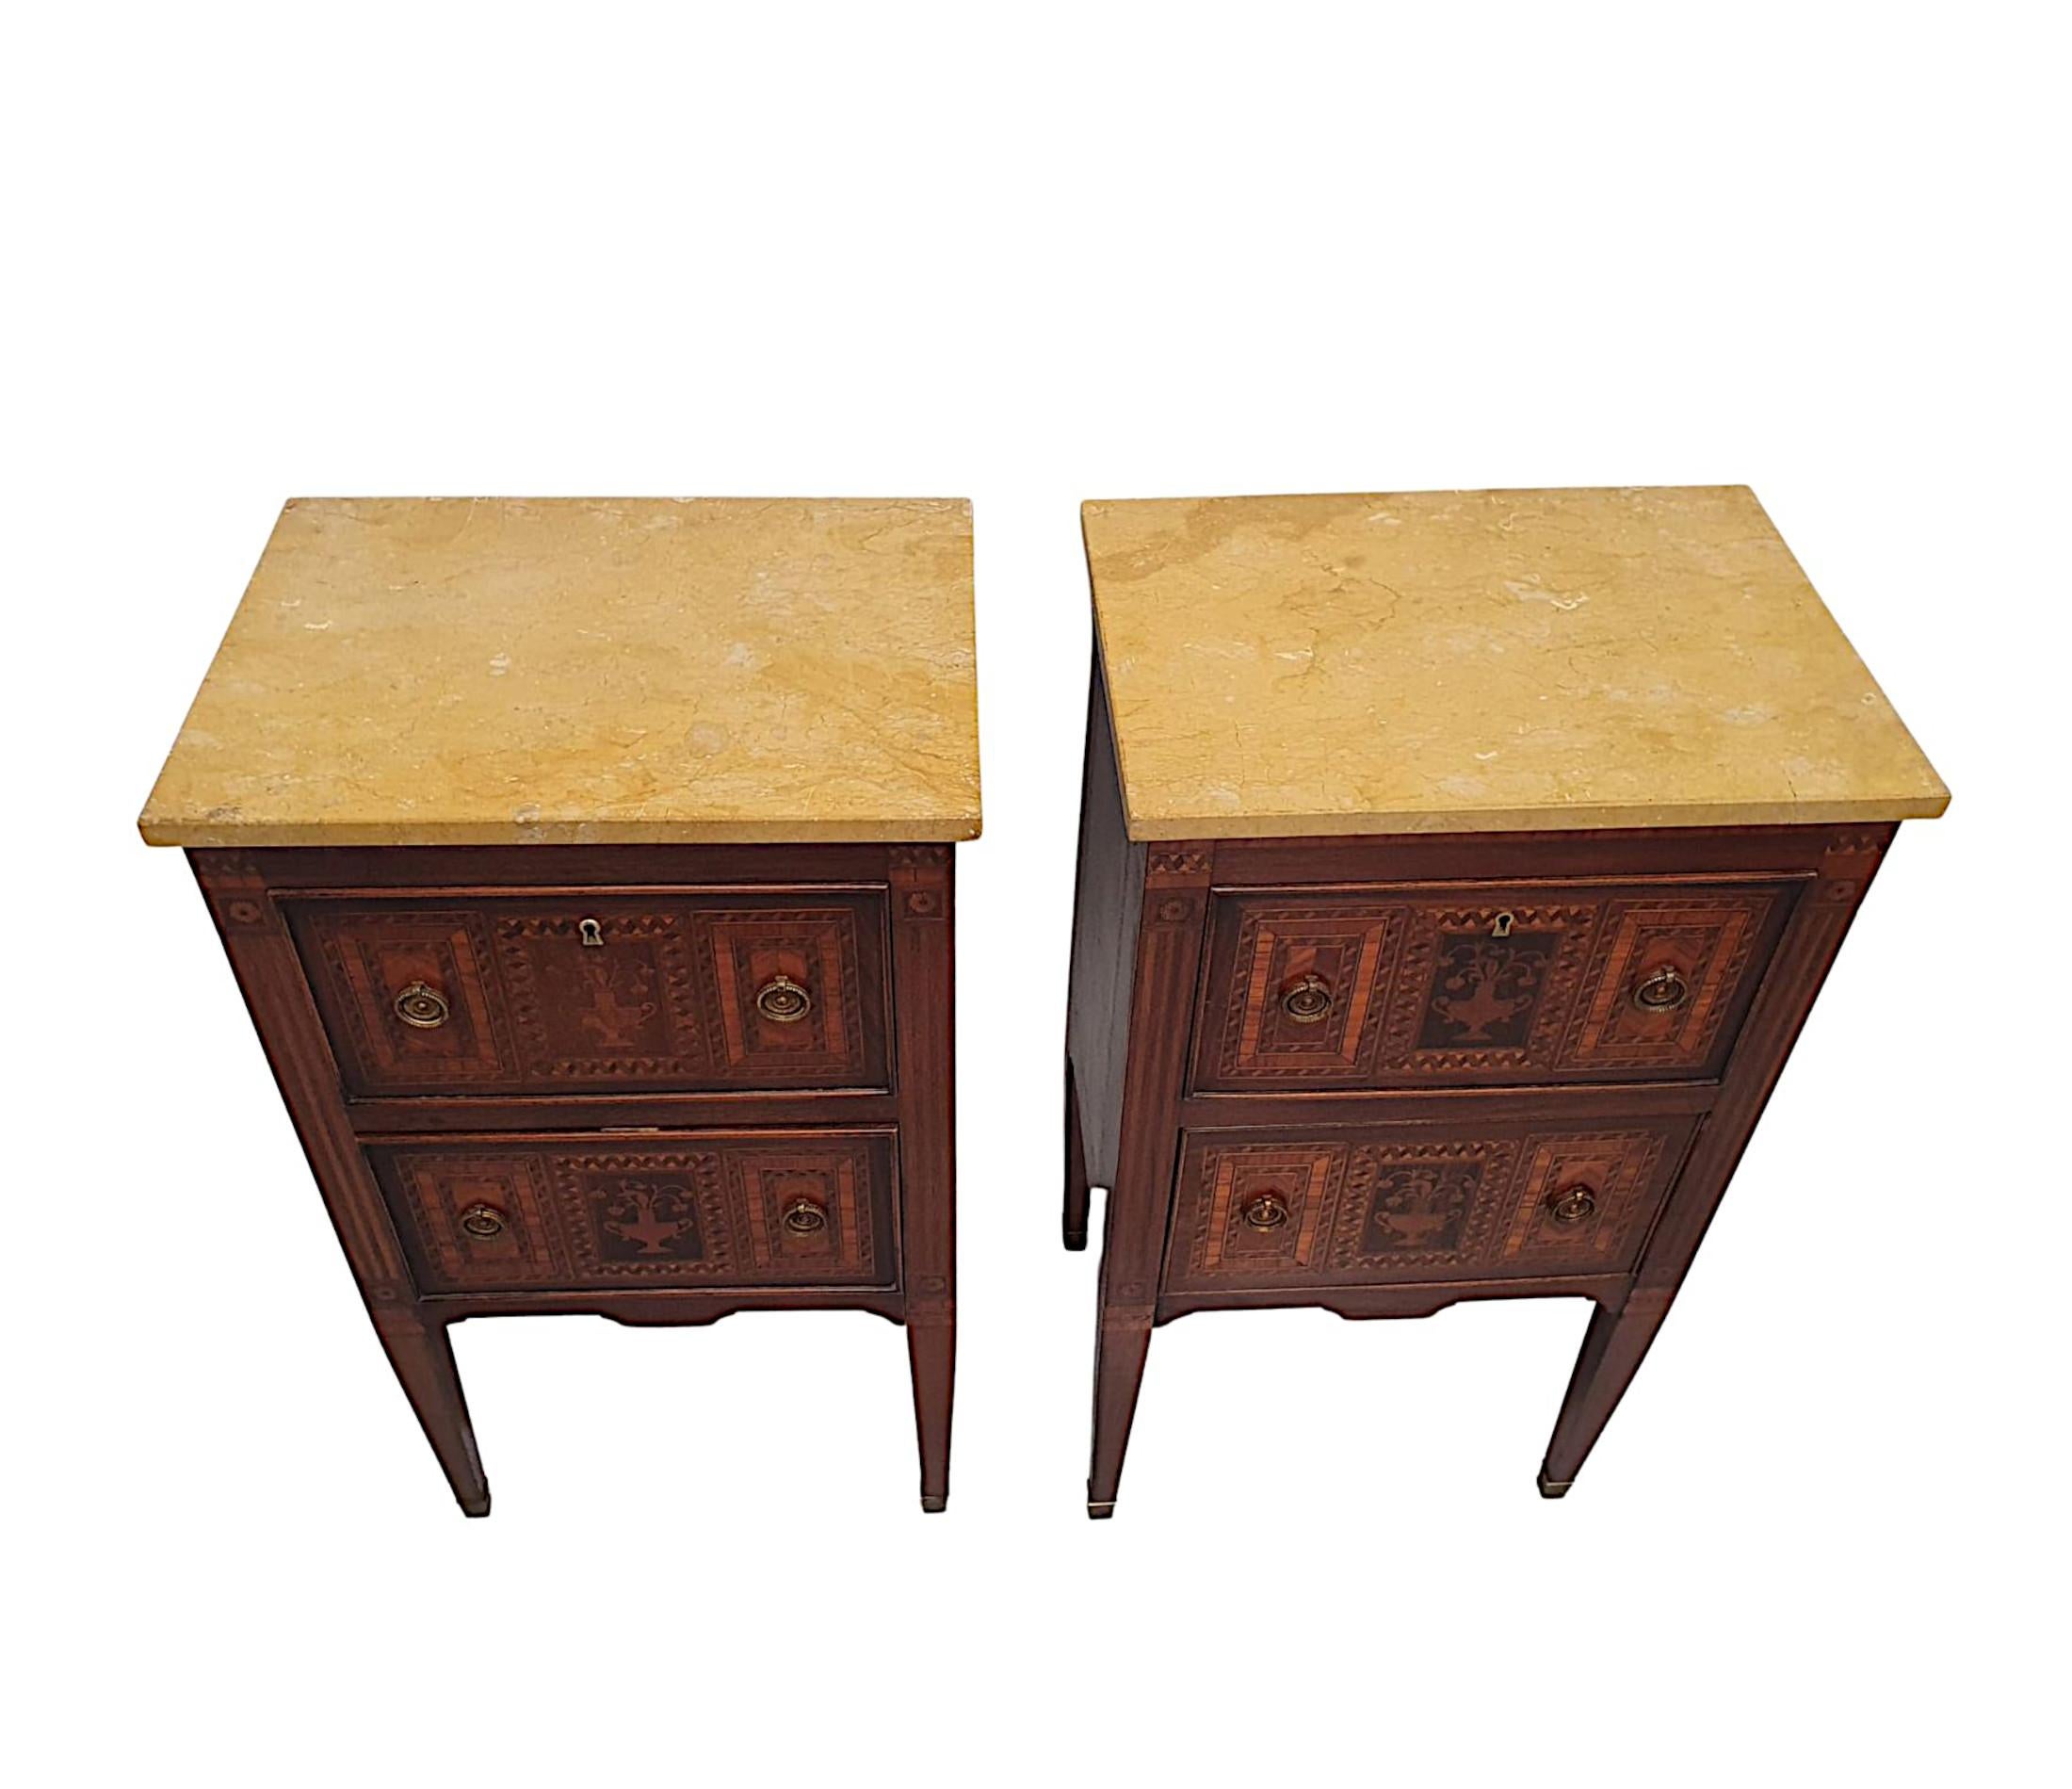 A fine pair of early 20th Century marble top bedside chests of drawers, of fabulous quality, finely carved with rich patination and grain, cross banded throughout and with highly inlaid marquetry panels.  The gorgeous, moulded Sienna marble top of